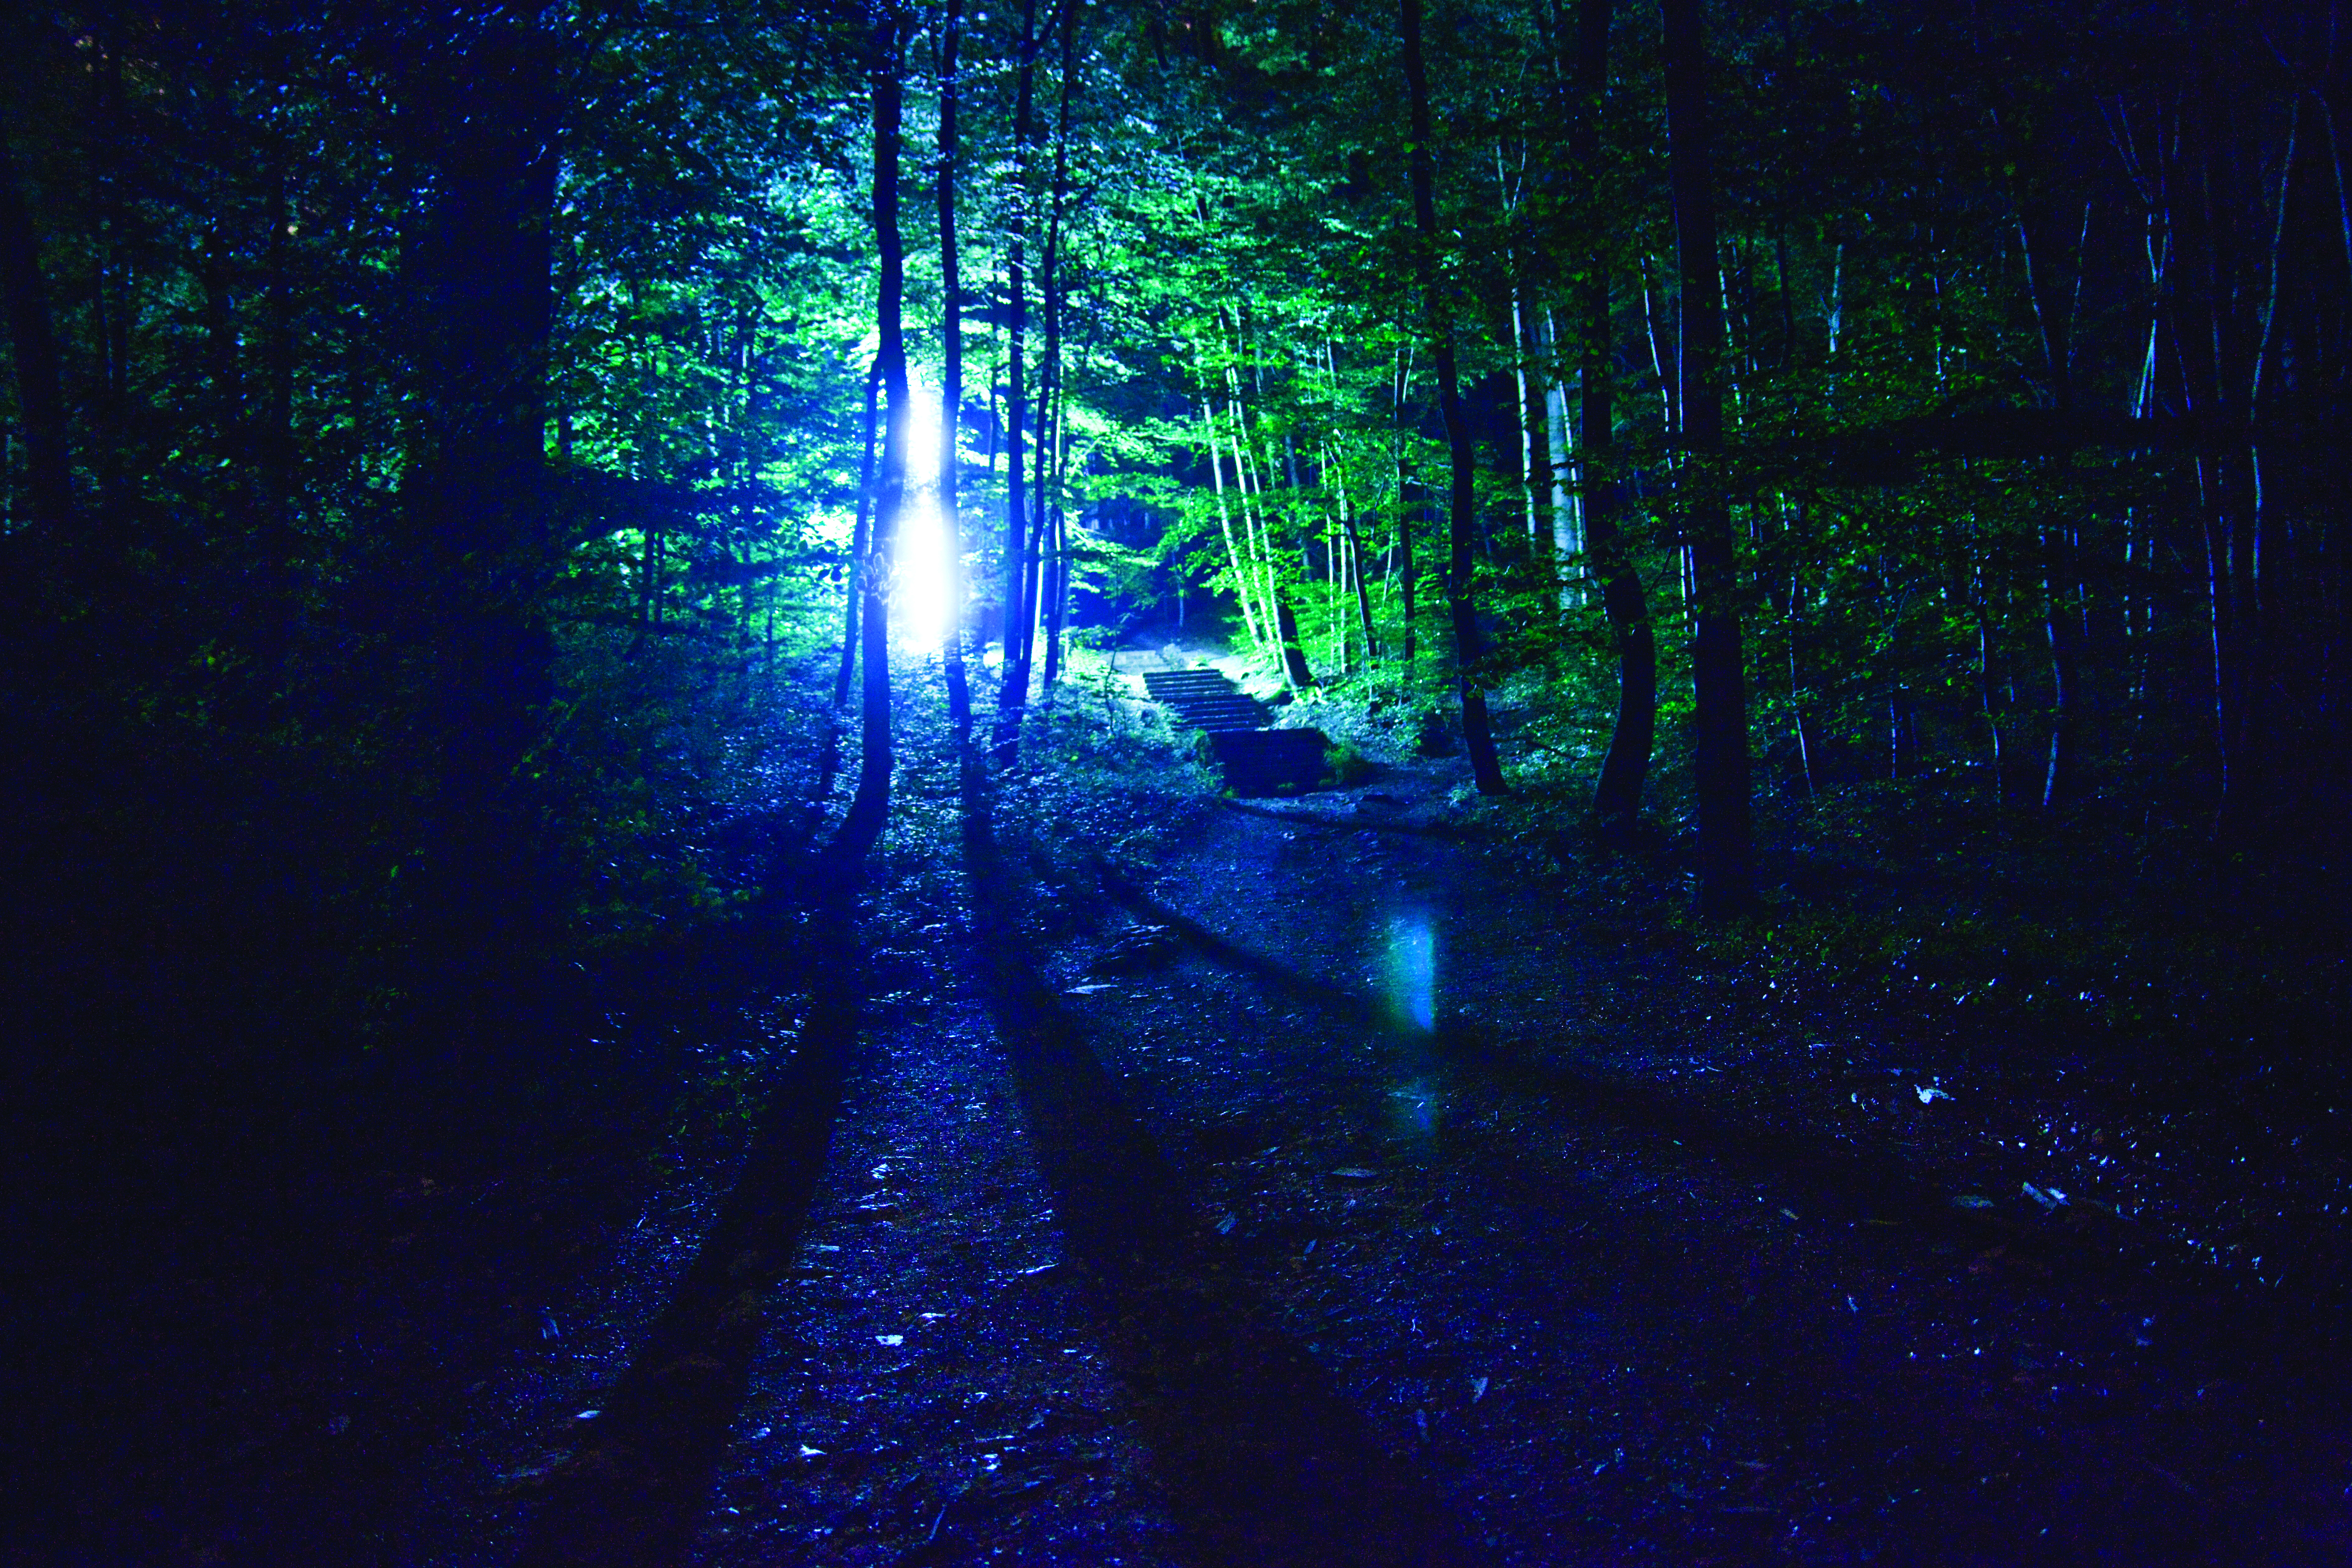 image of a forest dramatically backlit at night from Mette Ingvartsen's The Light Forest PRoject